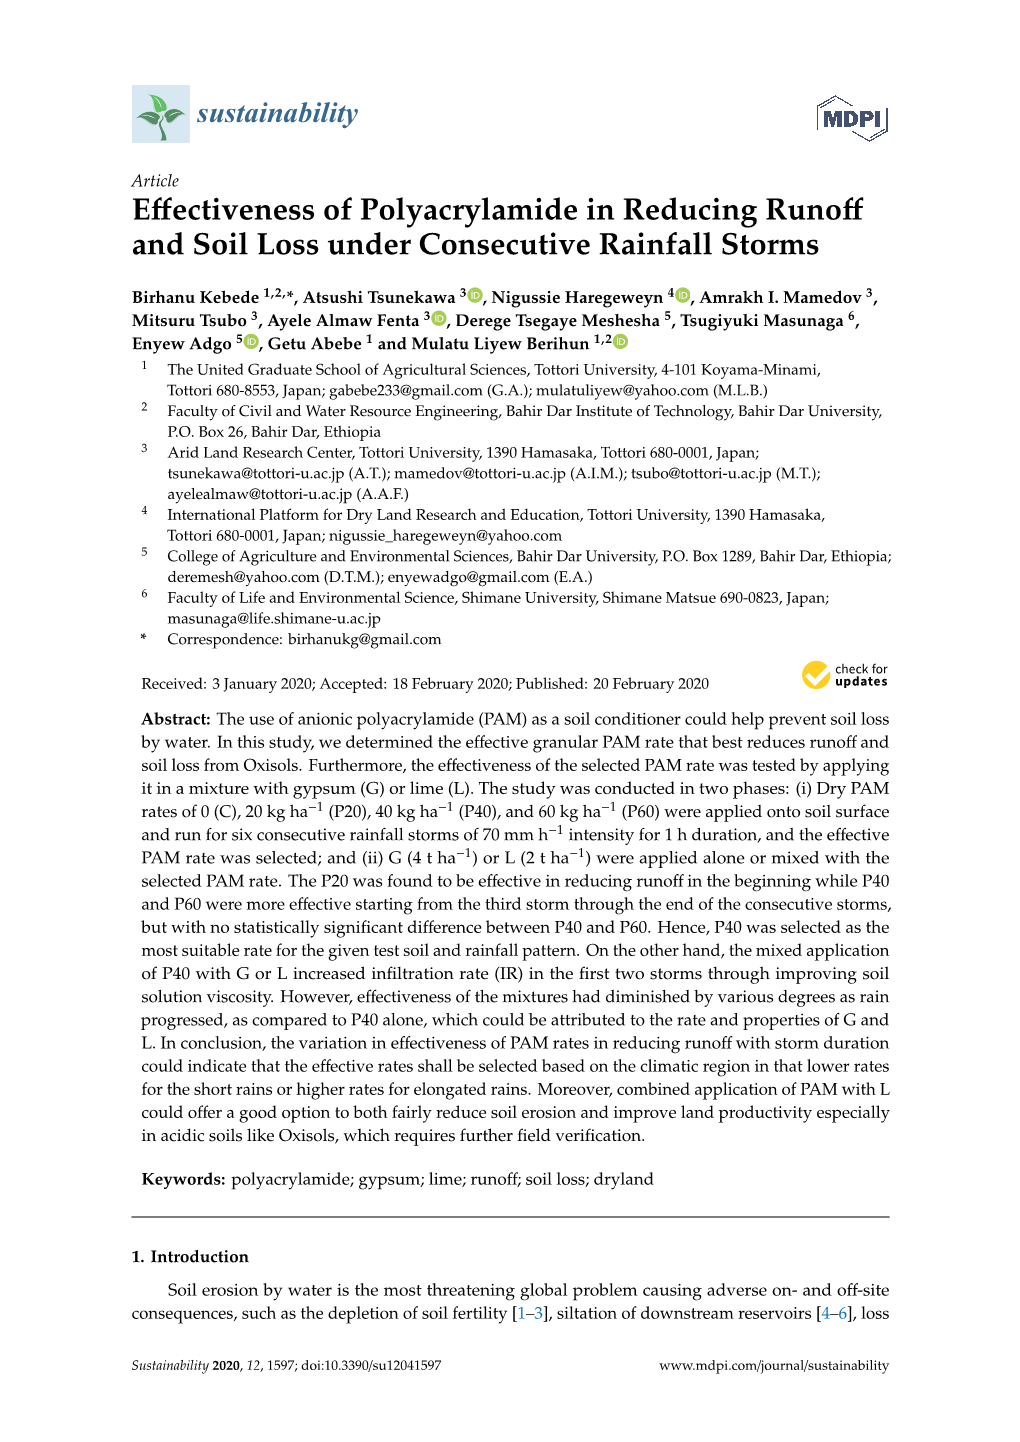 Effectiveness of Polyacrylamide in Reducing Runoff and Soil Loss Under Consecutive Rainfall Storms